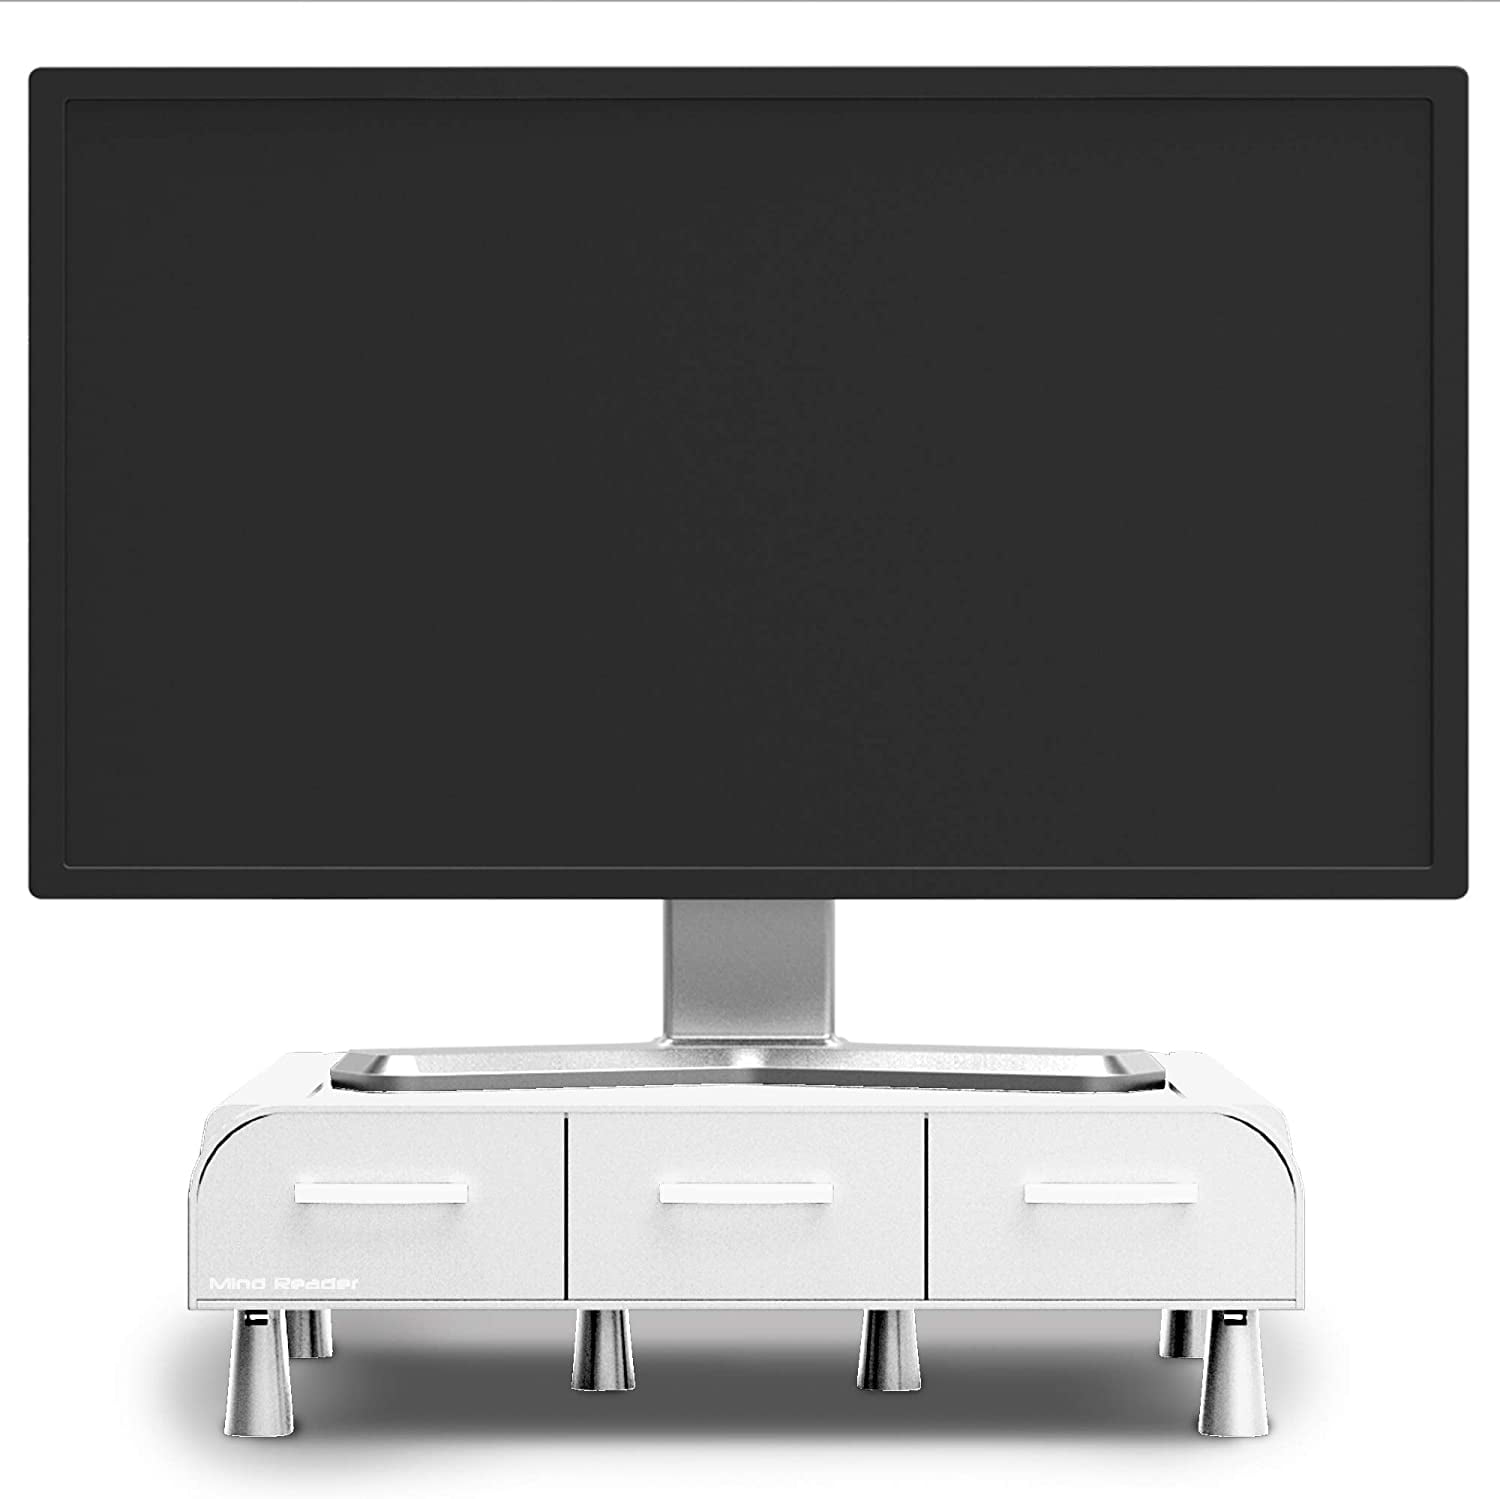 iMac Monitor Stand and Desk Organizer with 3 Draws for Storage Laptop White 2 Pack Mind Reader 2MONSTA3D-WHT PC